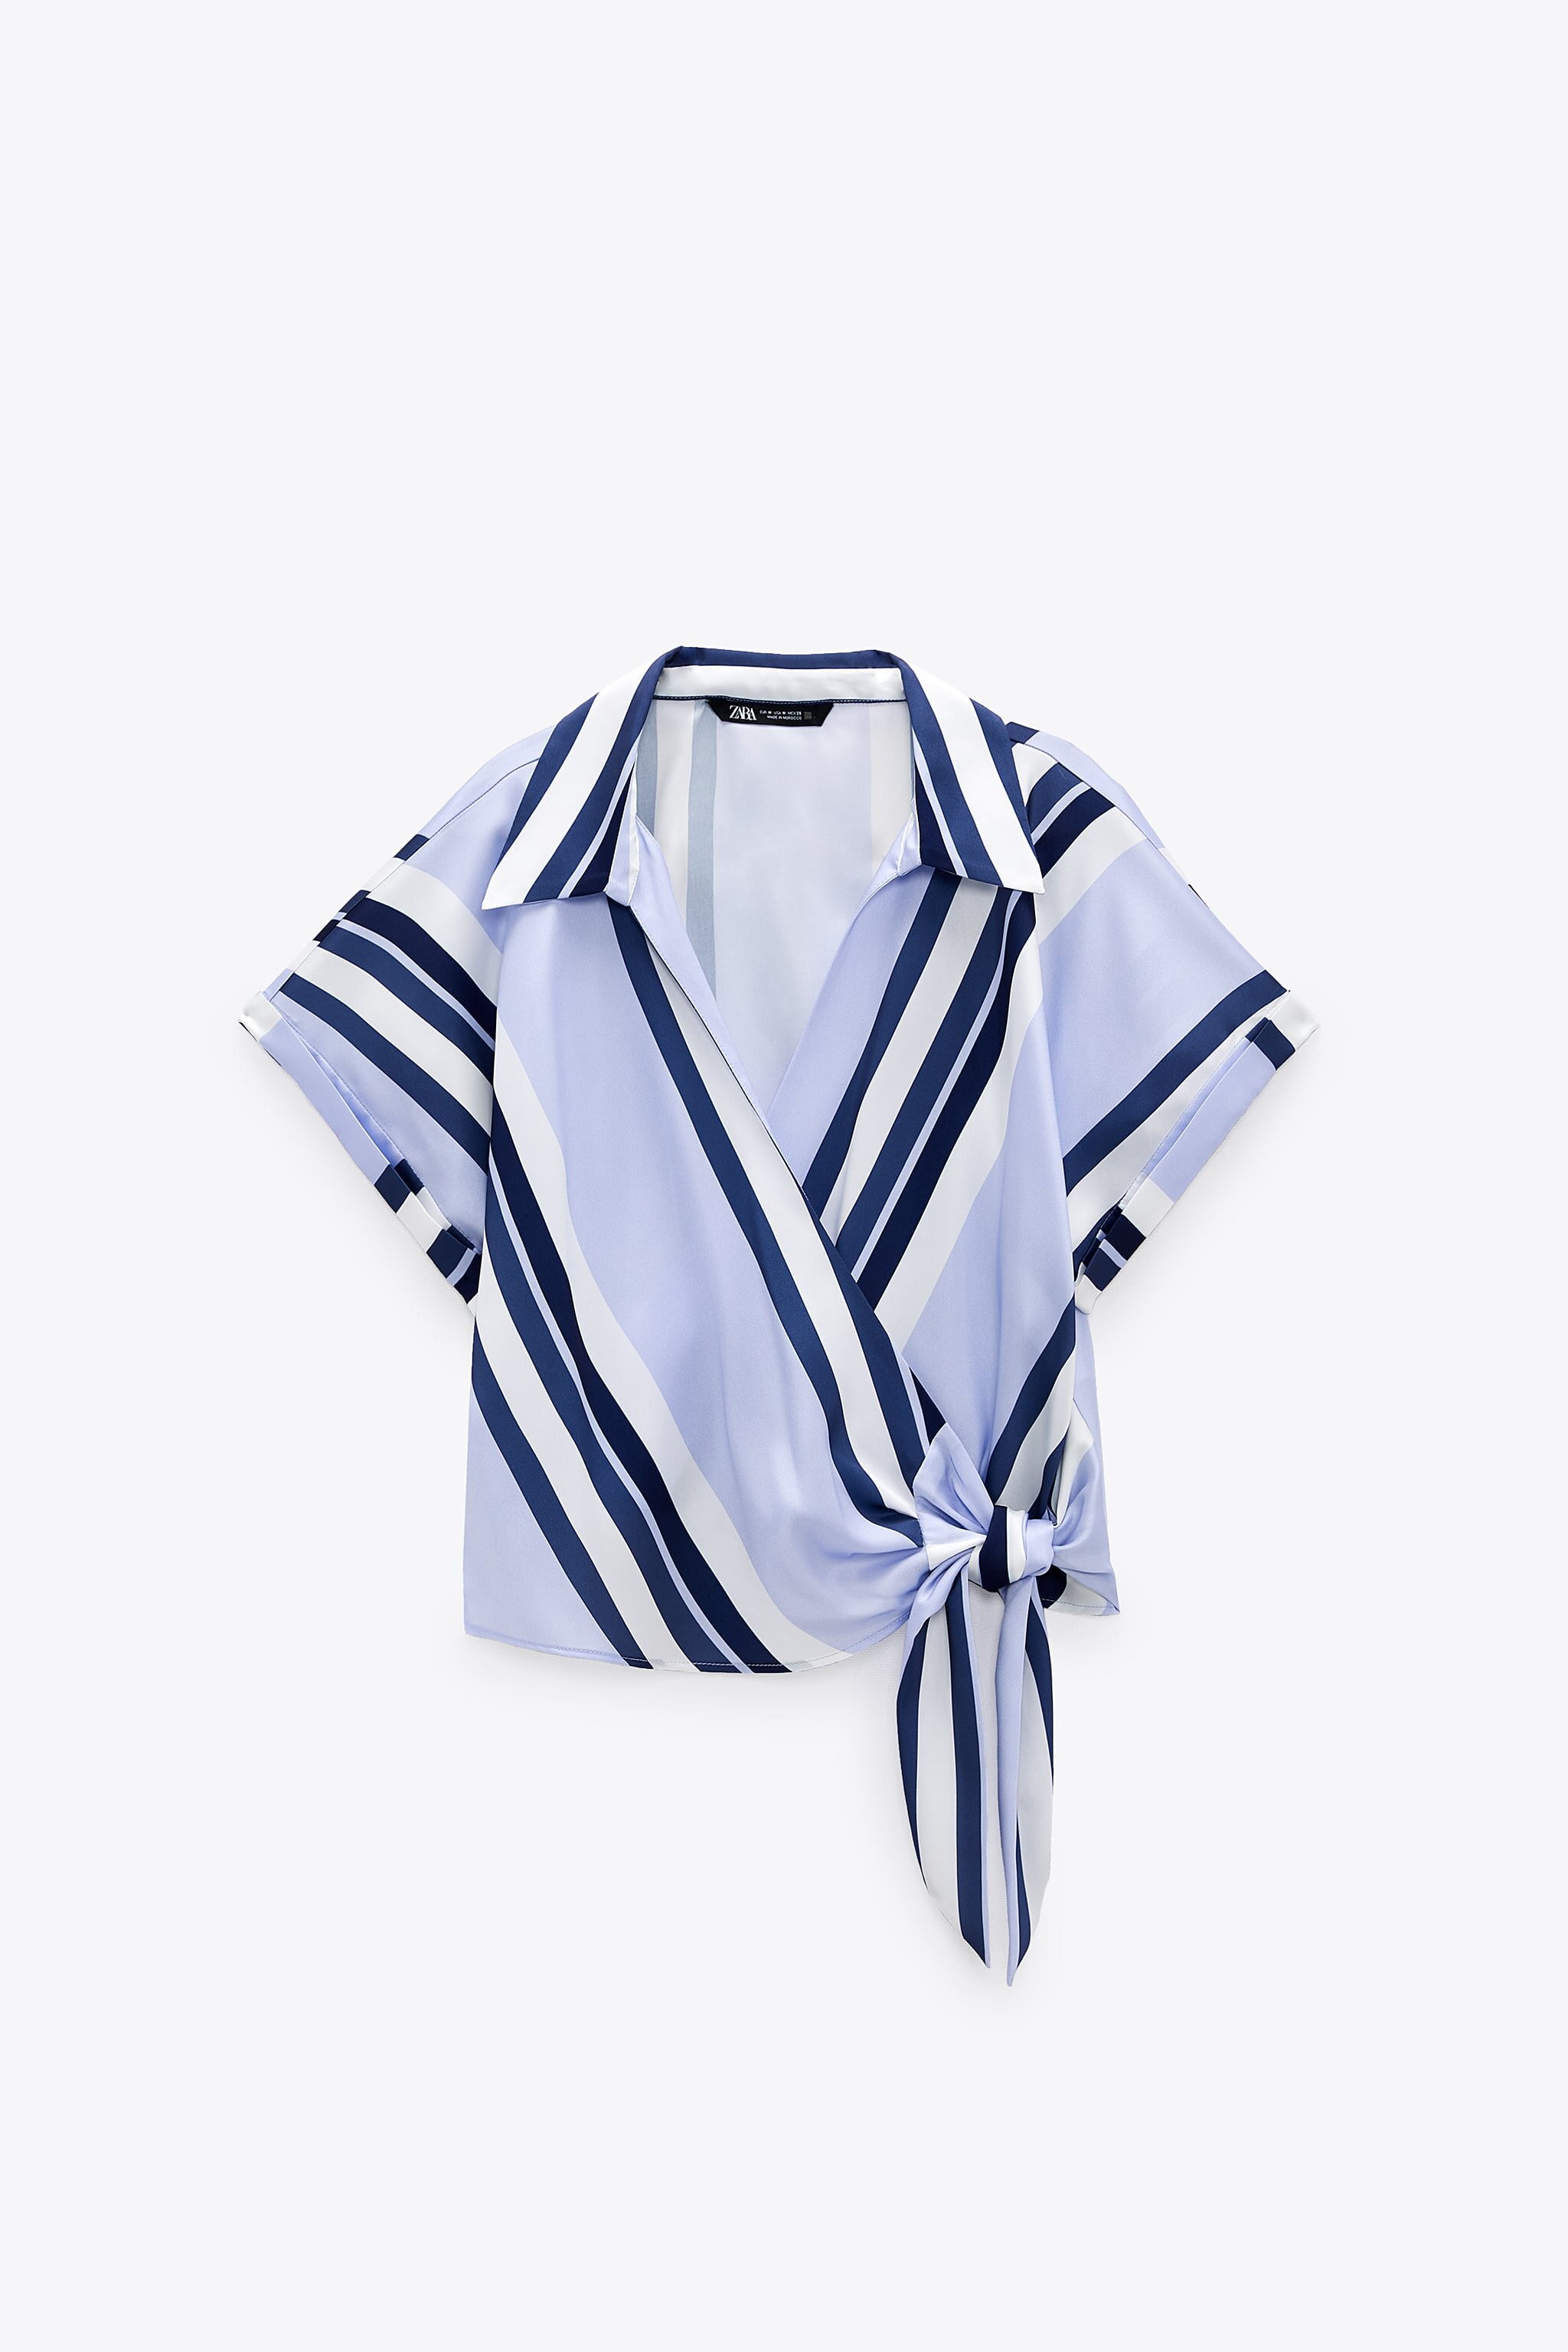 Striped shirt with Knot Detail, ₱1,145